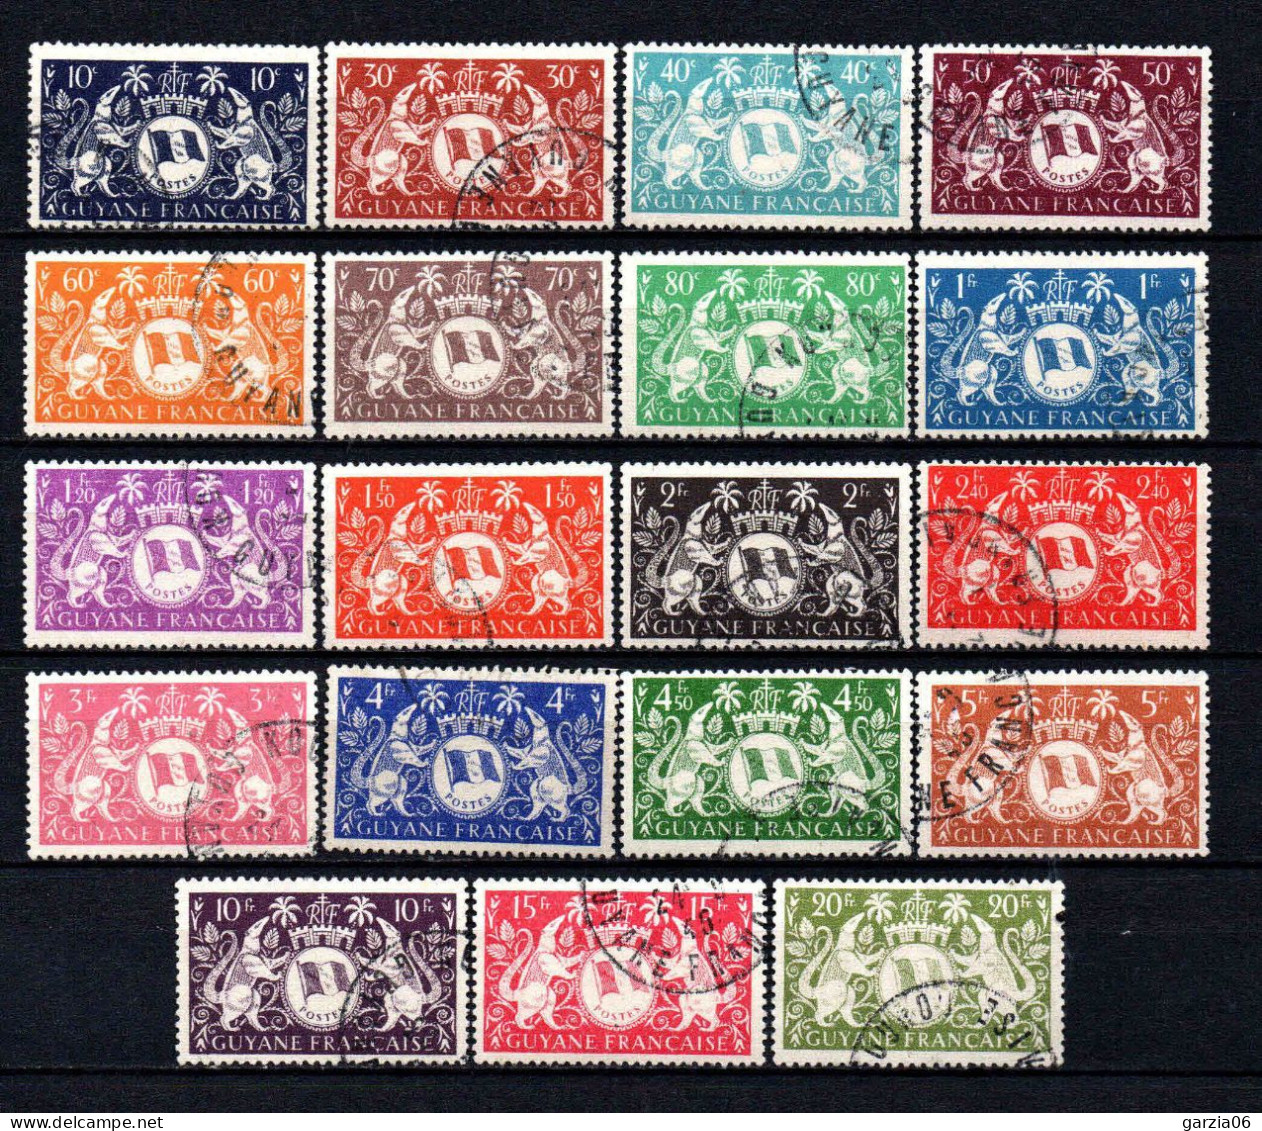 Guyane - 1945 -  Série De Londres  -  N° 182 à 200 - Oblit - Used - Used Stamps